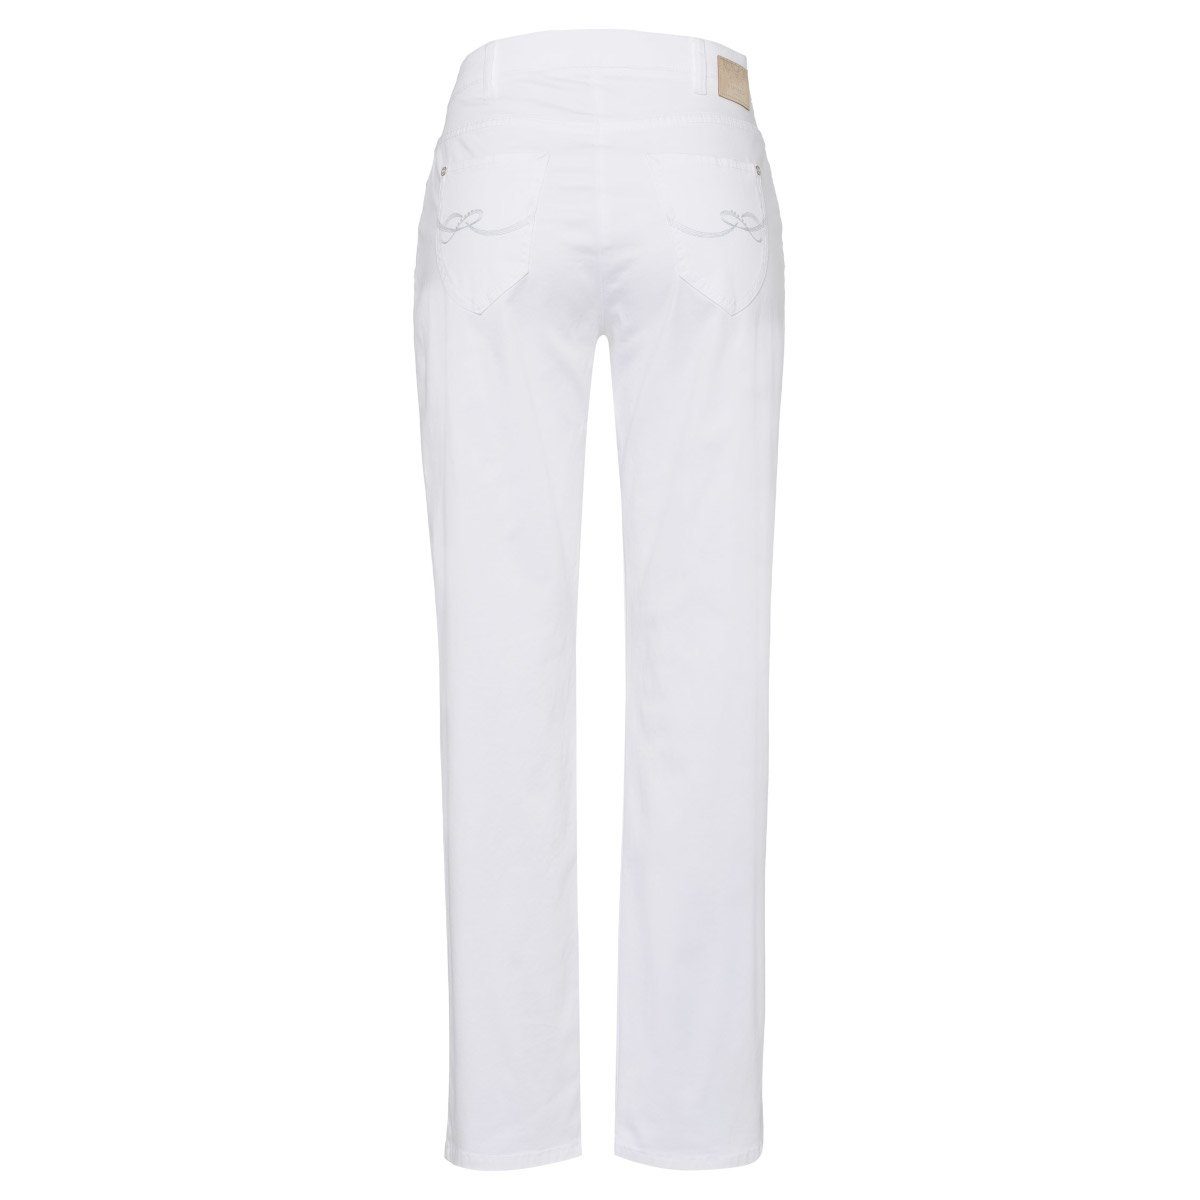 RAPHAELA by BRAX 5-Pocket-Jeans Corry COMFORT Fay weiß Plus Comfort FIT